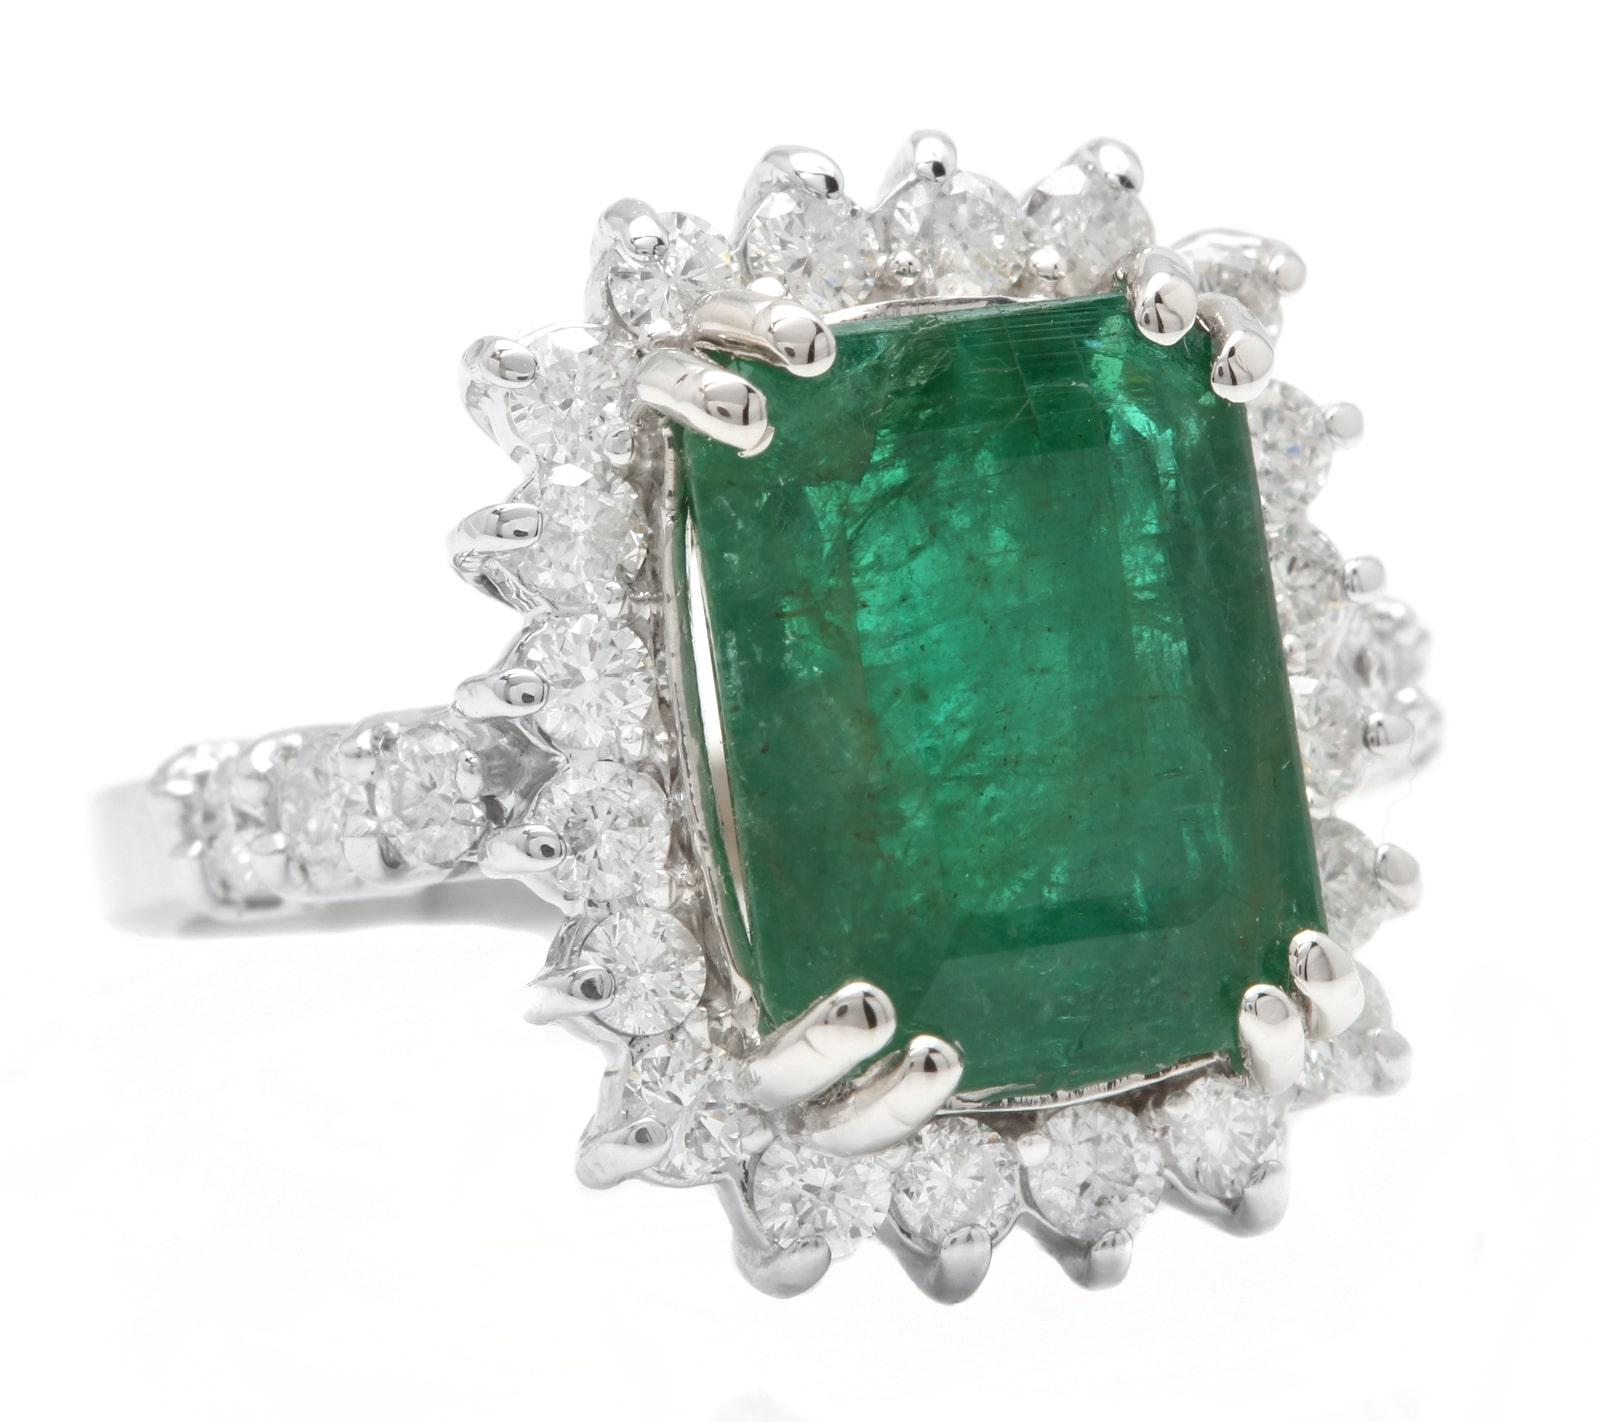 5.00 Carats Natural Emerald and Diamond 14K Solid White Gold Ring

Suggested Replacement Value: $7,500.00

Total Natural Green Emerald Weight is: Approx. 4.00 Carats (transparent) 

Emerald Measures: Approx. 11.20 x 9.20mm

Natural Round Diamonds